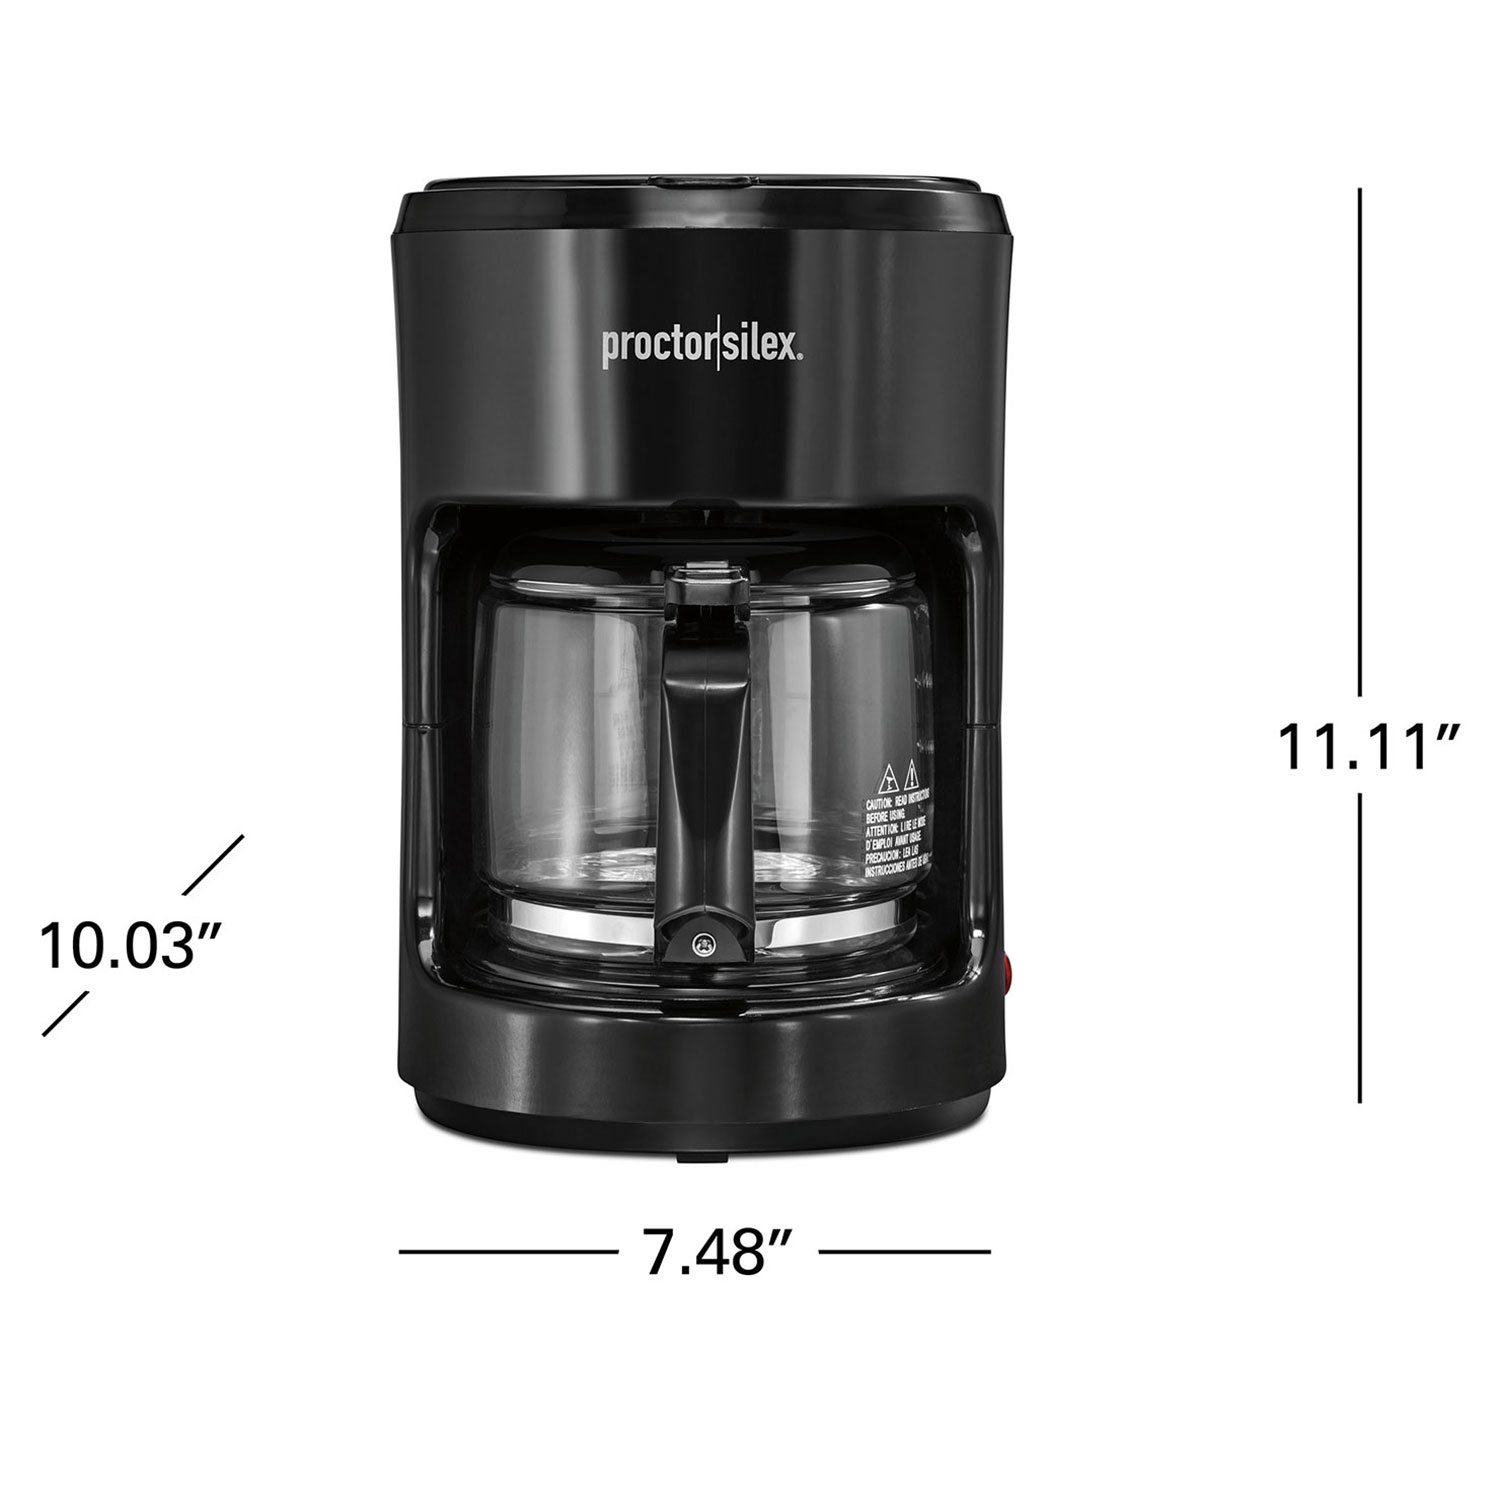 Proctor Silex Coffee Maker, Works with Smart Plugs That are